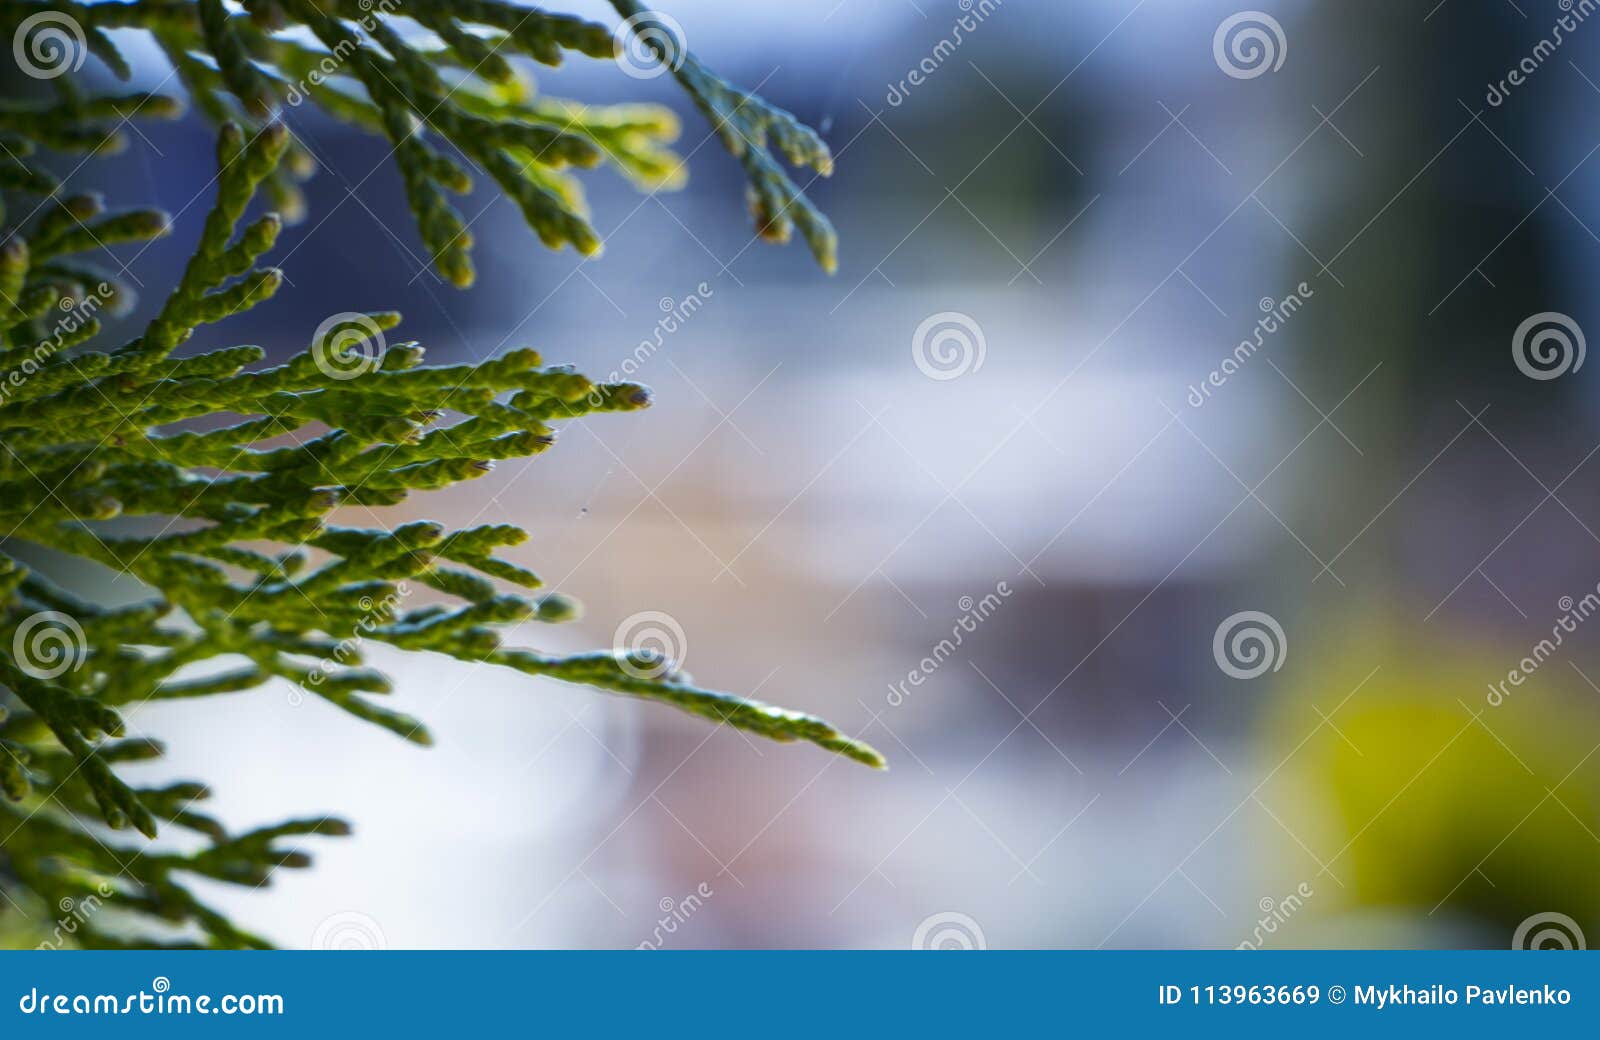 Beautiful Green Christmas Leaves of Thuja Trees. Thuja Occidentalis is ...